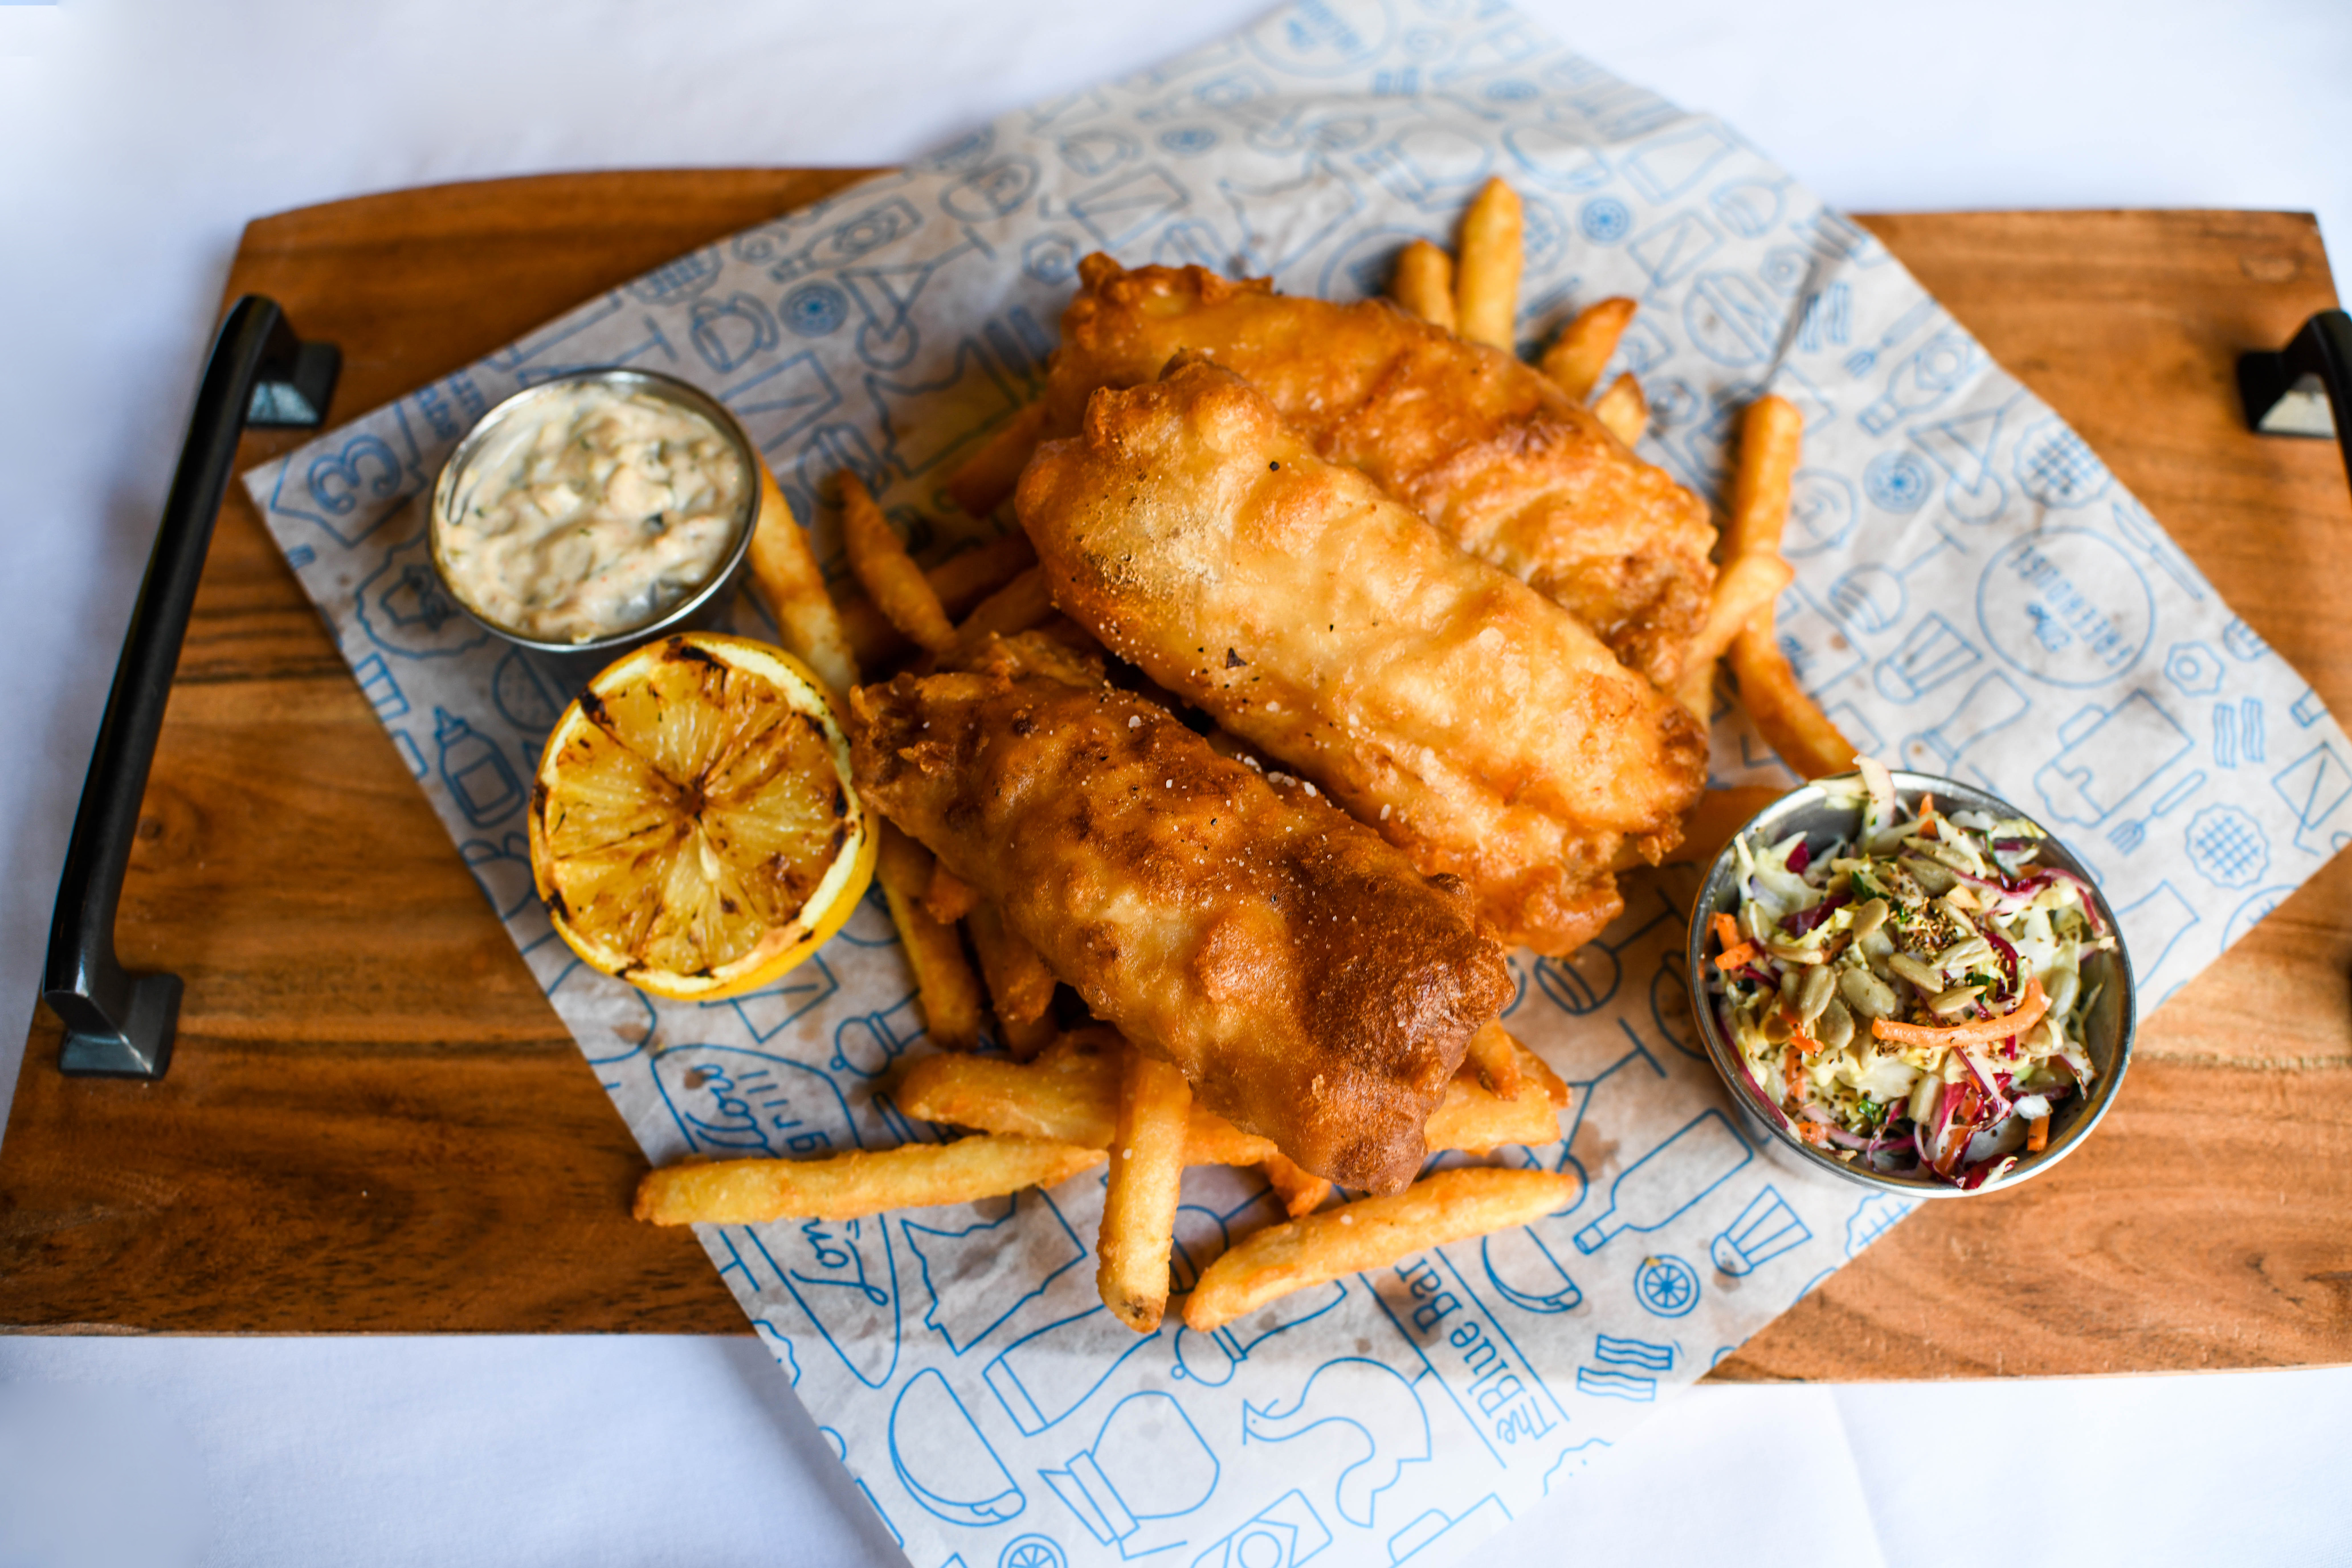 Fish and chips with lemon, coleslaw, and tartar sauce over a blue and white paper on a wooden board. 